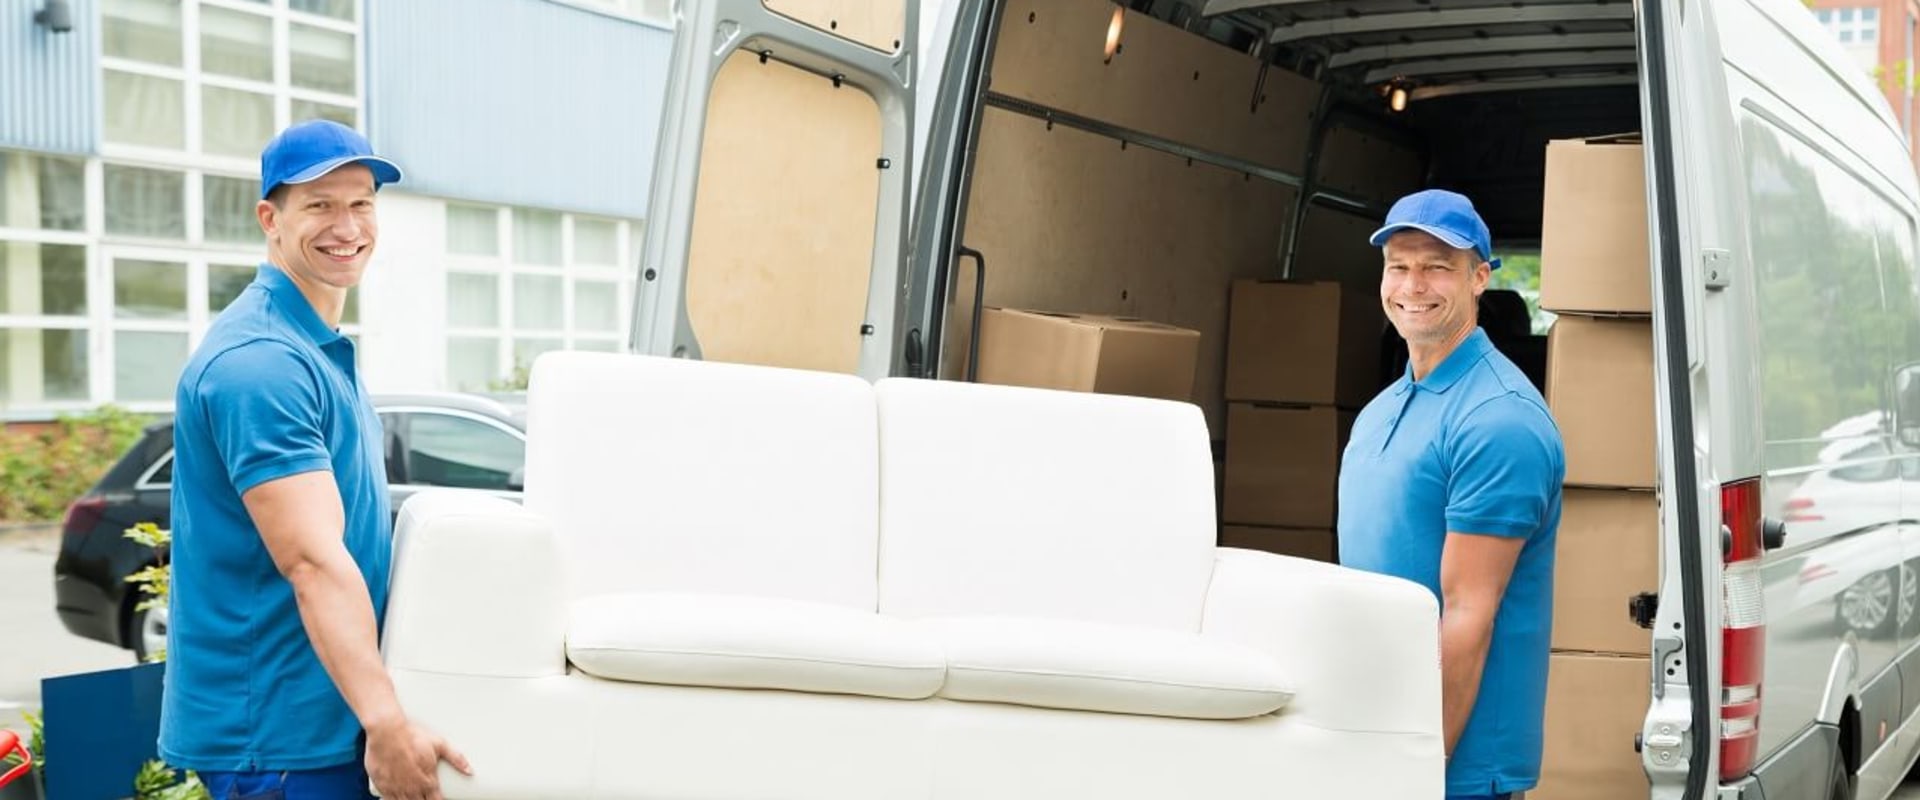 Licensing and Insurance Coverage for Moving Companies in Las Vegas